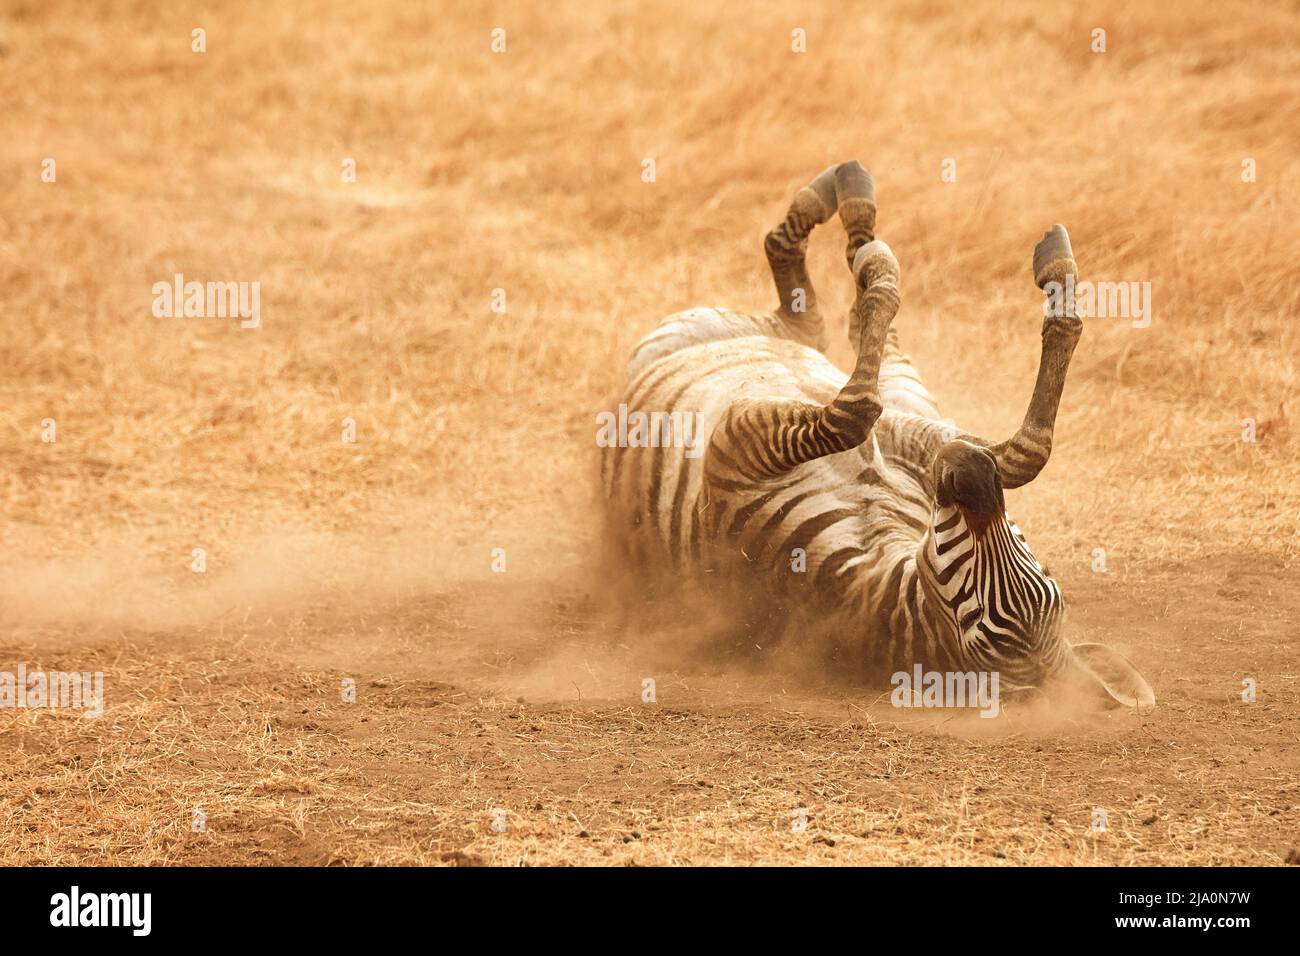 A Zebra rolls on the ground inside the Ngorongoro Crater protected area, Tanzania, Africa. Stock Photo